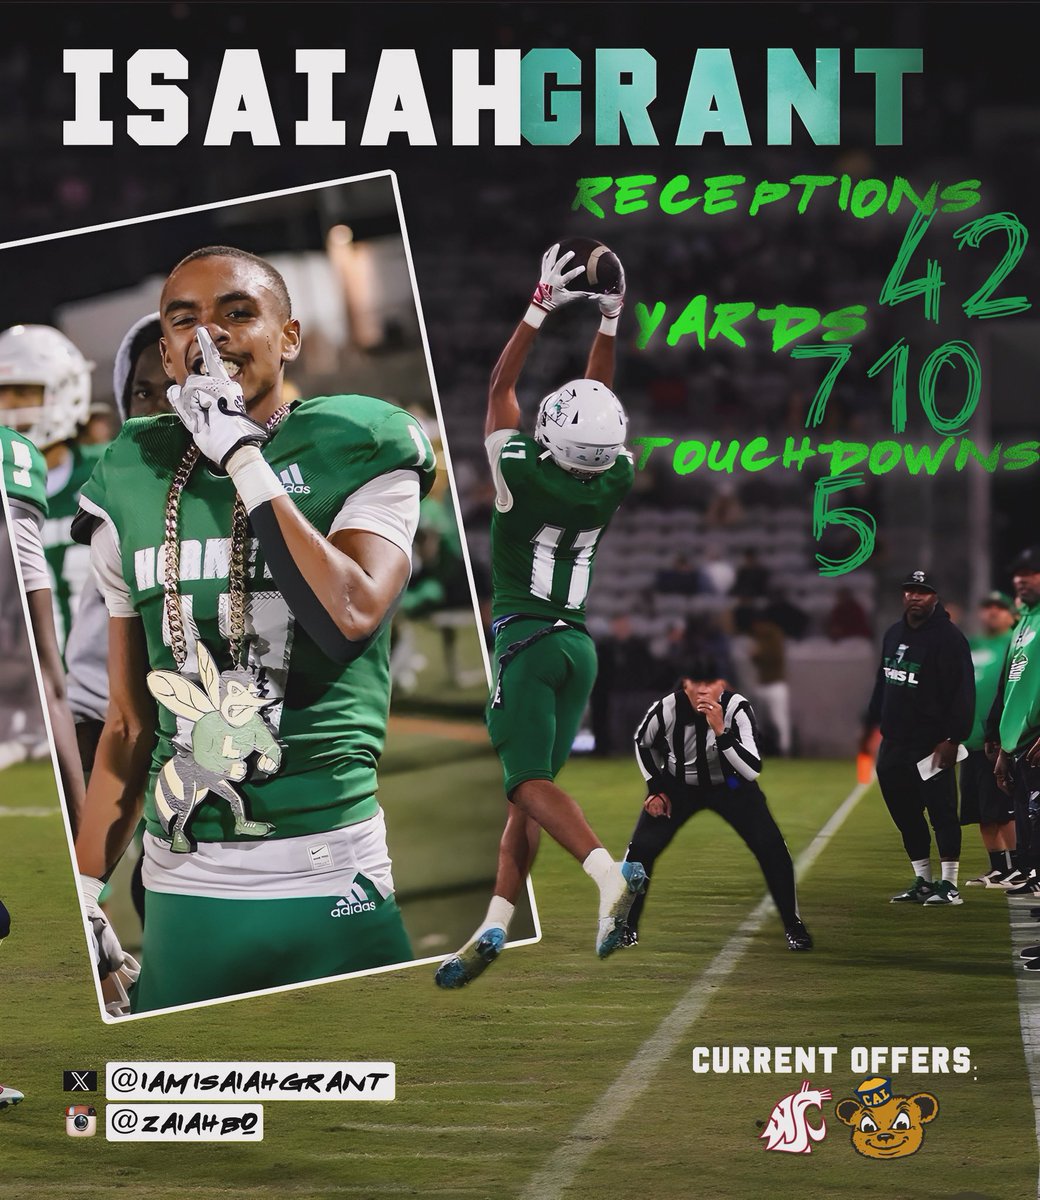 Class of 25’ WR Isaiah Grant (@IamIsaiahGrant) put up some numbers for his Junior Year, including catching a 99 yard touchdown vs St. Bonaventure. #LincolnCertified 🍀 #RepTheHive